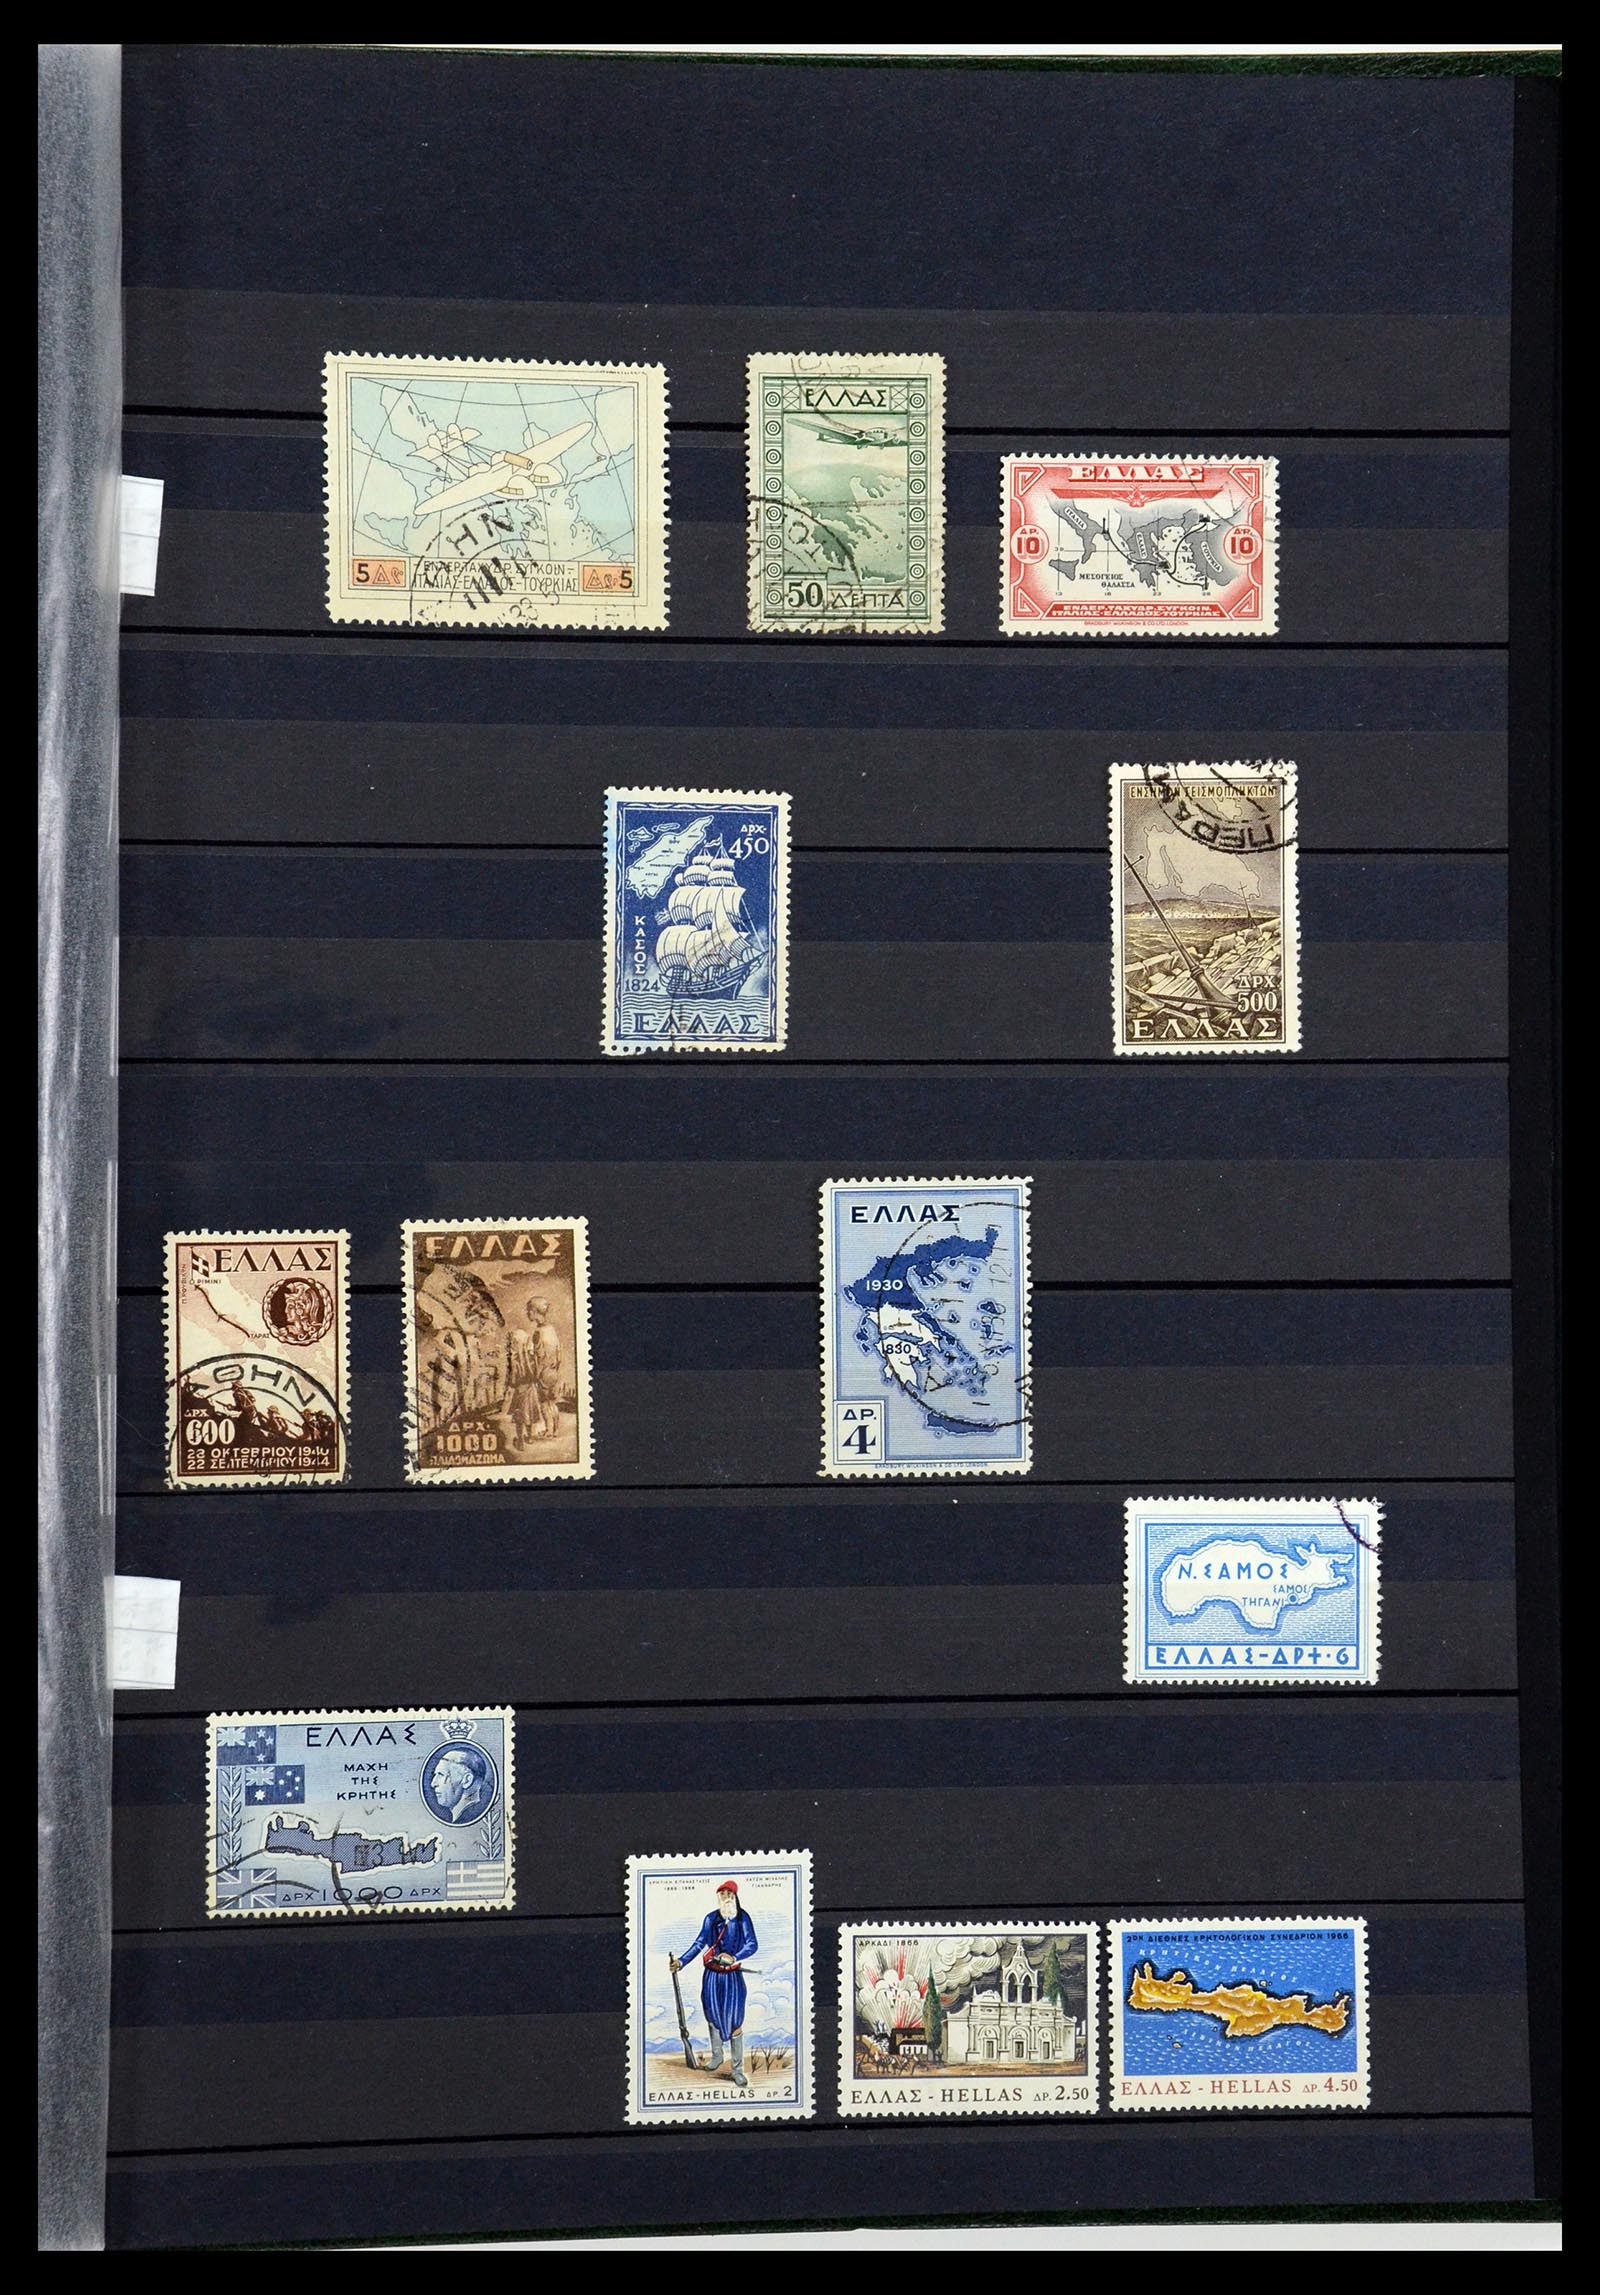 36238 041 - Stamp collection 36238 Motif maps 1900-2000.